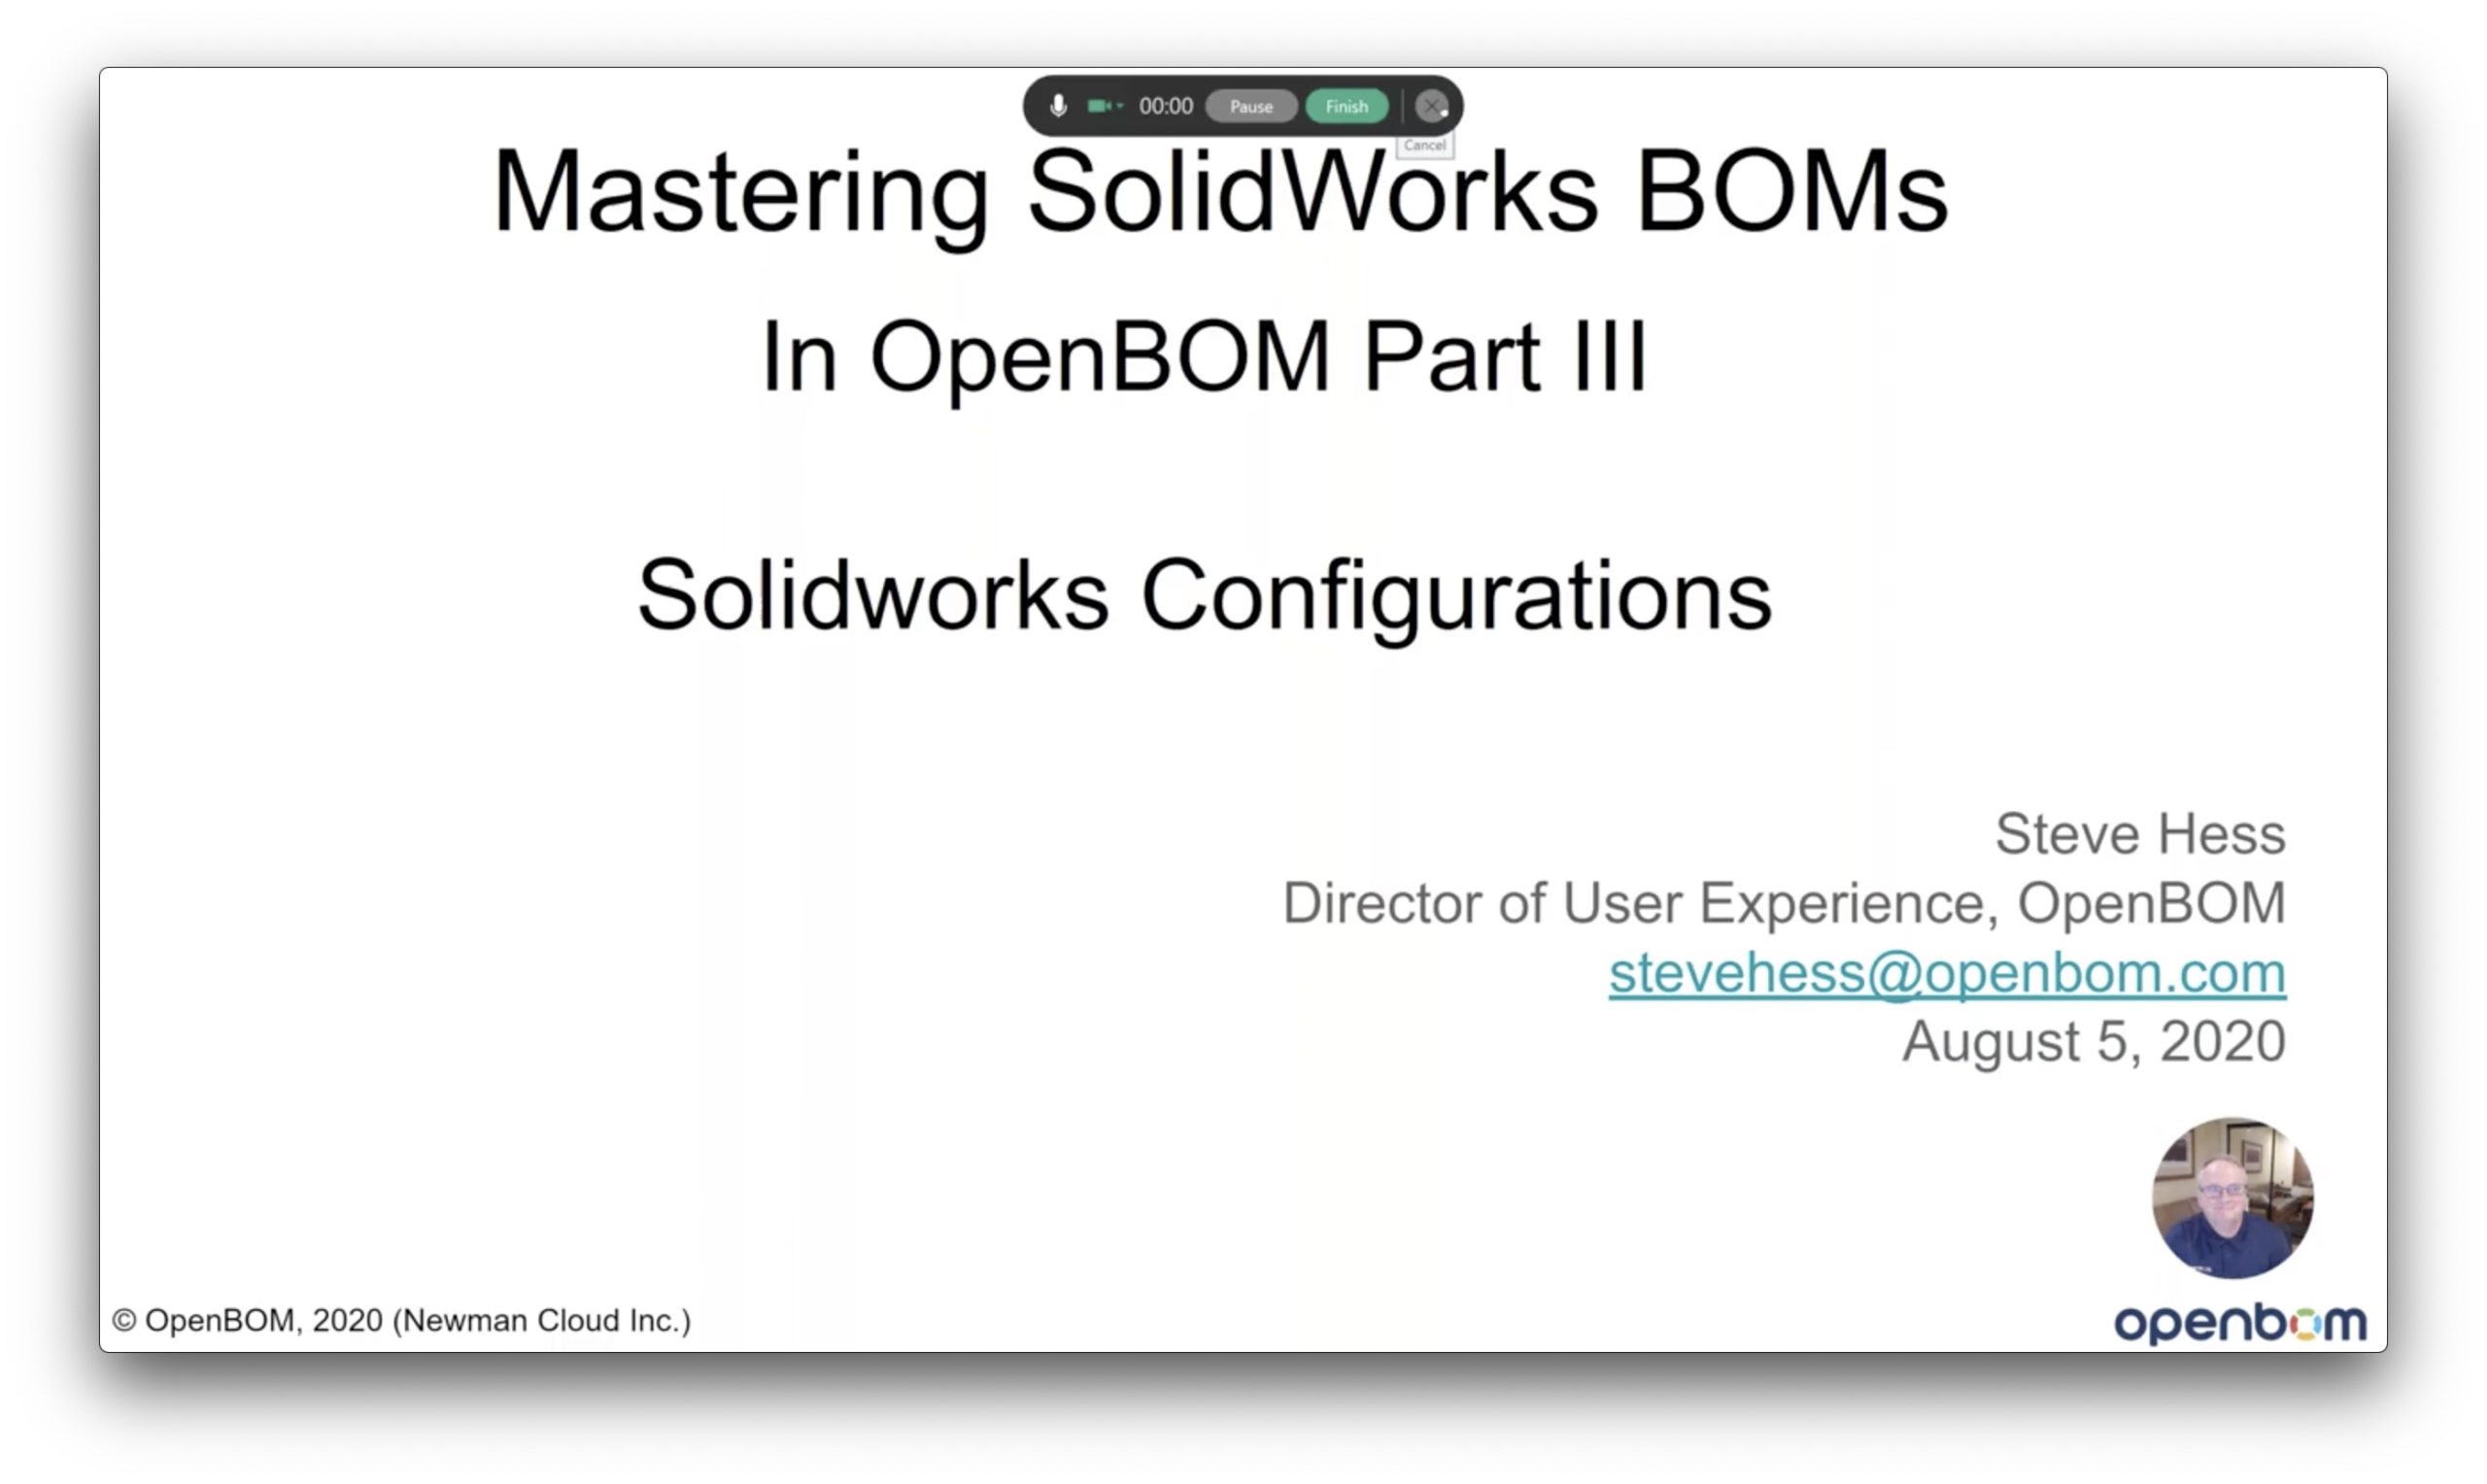 WEBINAR: OpenBOM for Solidworks Part III – Purchased Assemblies and Configurations